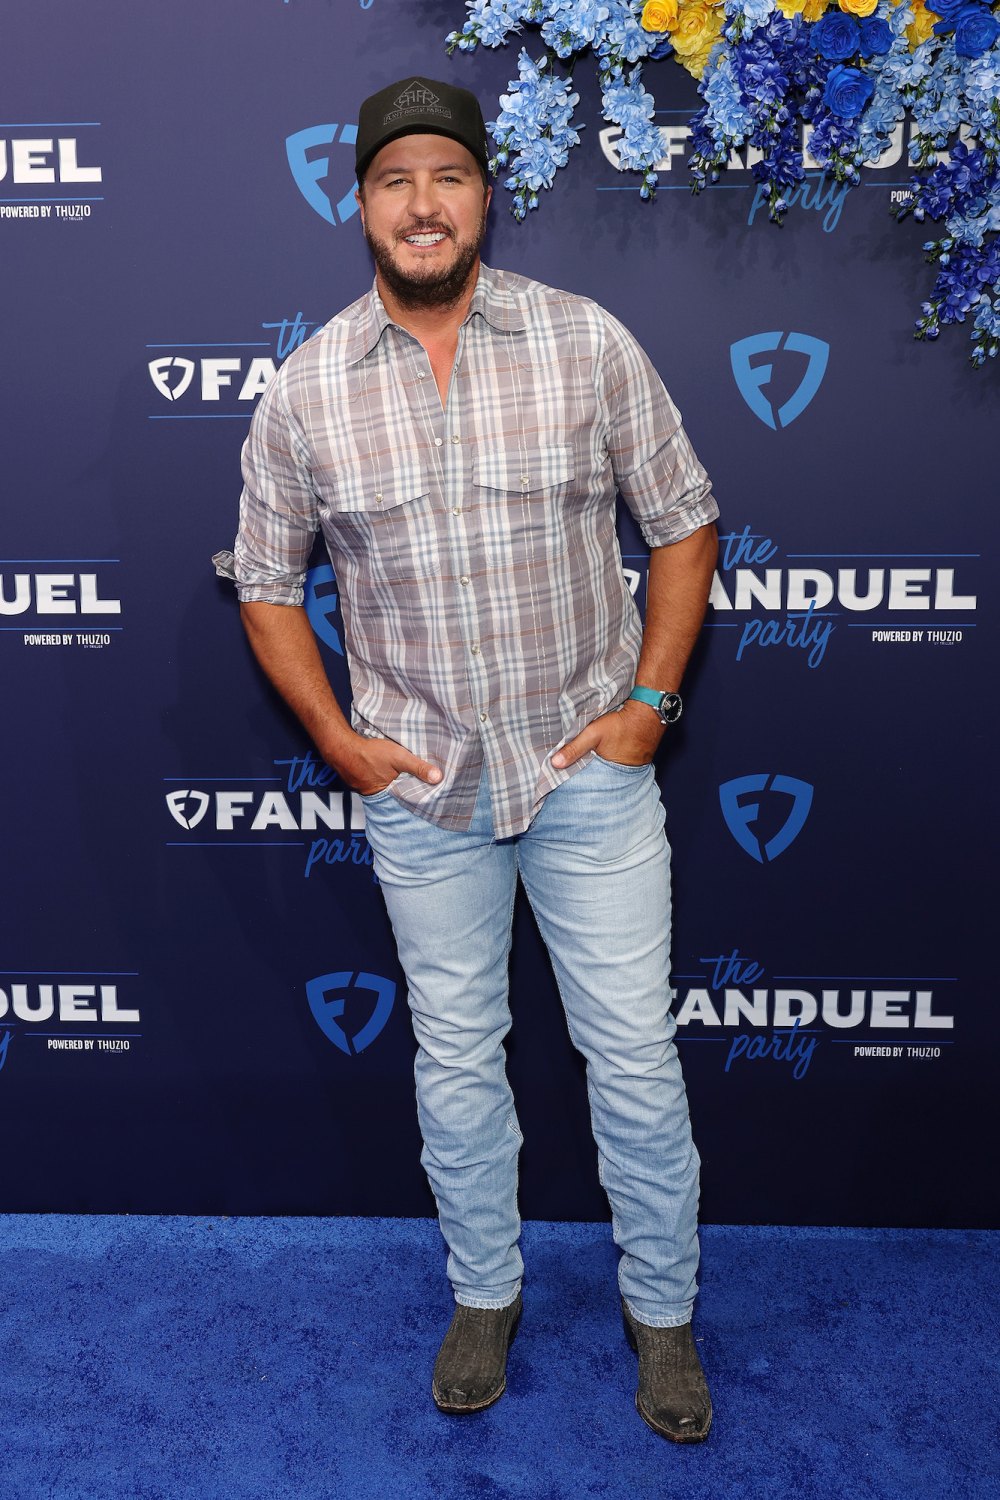 Luke Bryan Insists His Height Is to Blame for Onstage Falls Not Alcohol